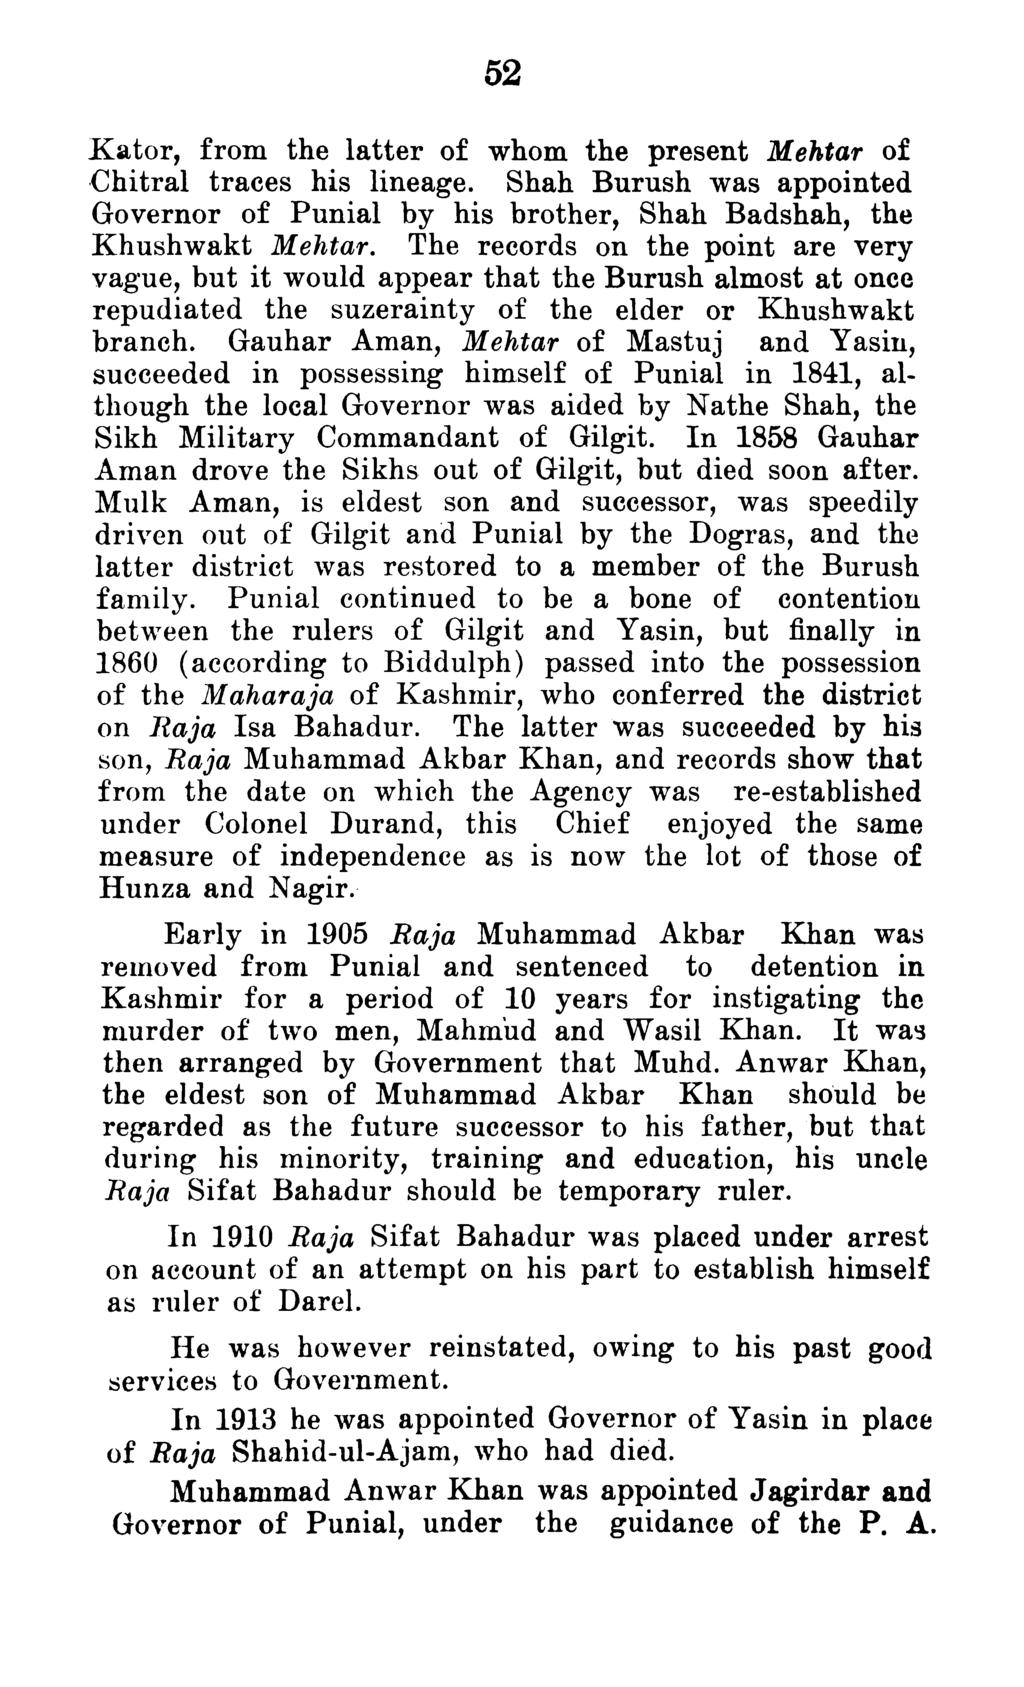 Kator, from the latter of whom the present Mehtar of Chitral traces his lineage. Shah Burush was appointed Governor of Punial by his brother, Shah Badshah, the Khushwakt Mehtar.